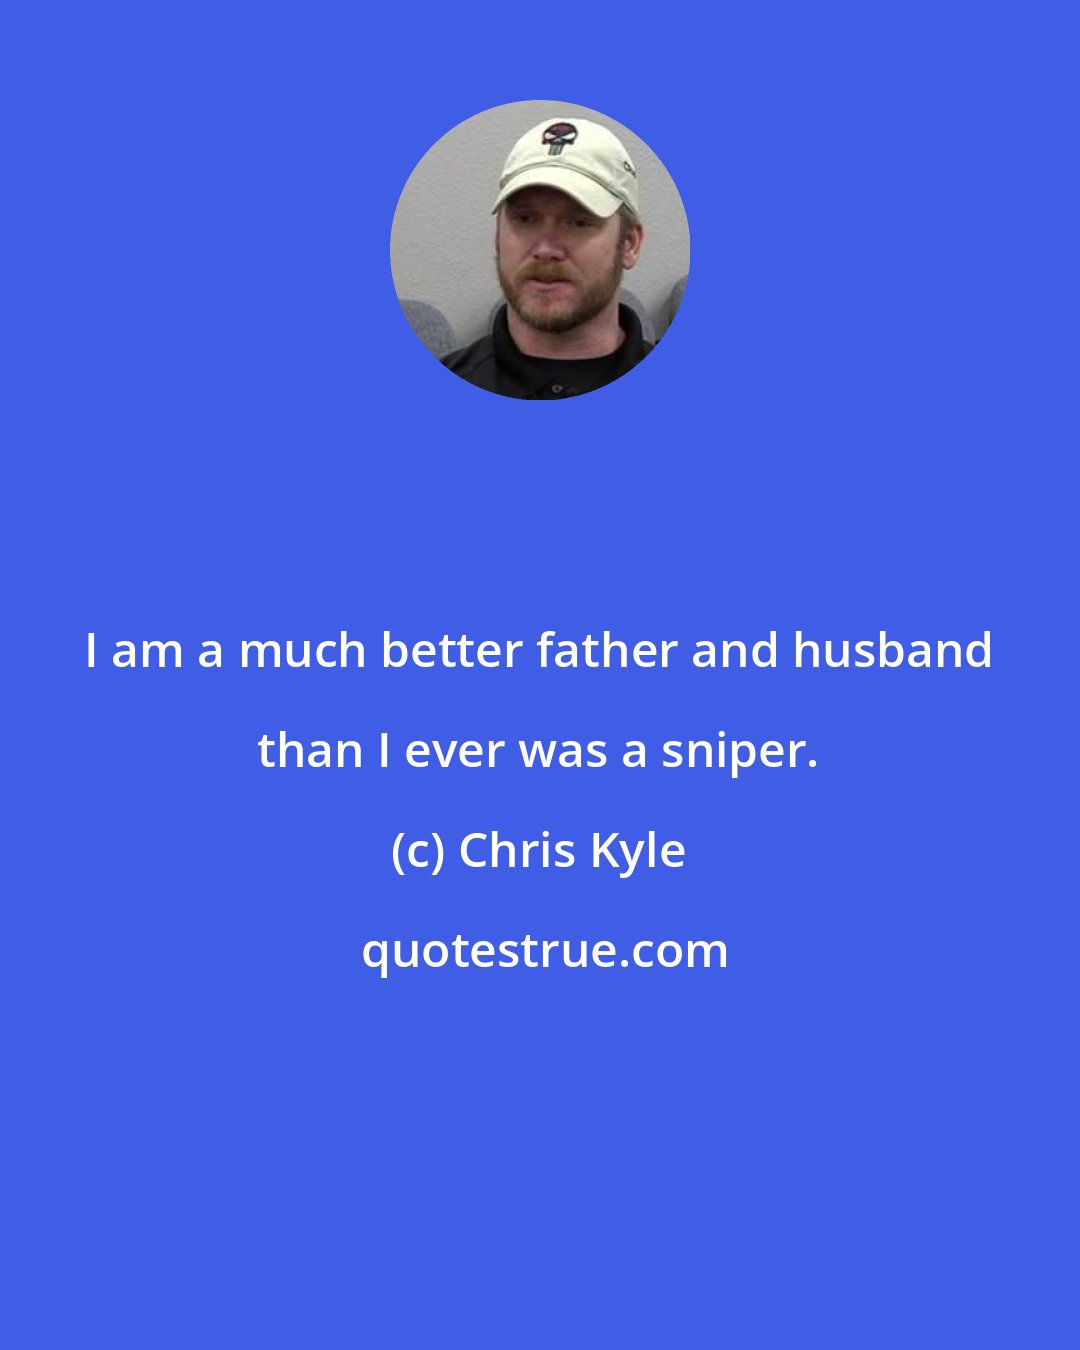 Chris Kyle: I am a much better father and husband than I ever was a sniper.